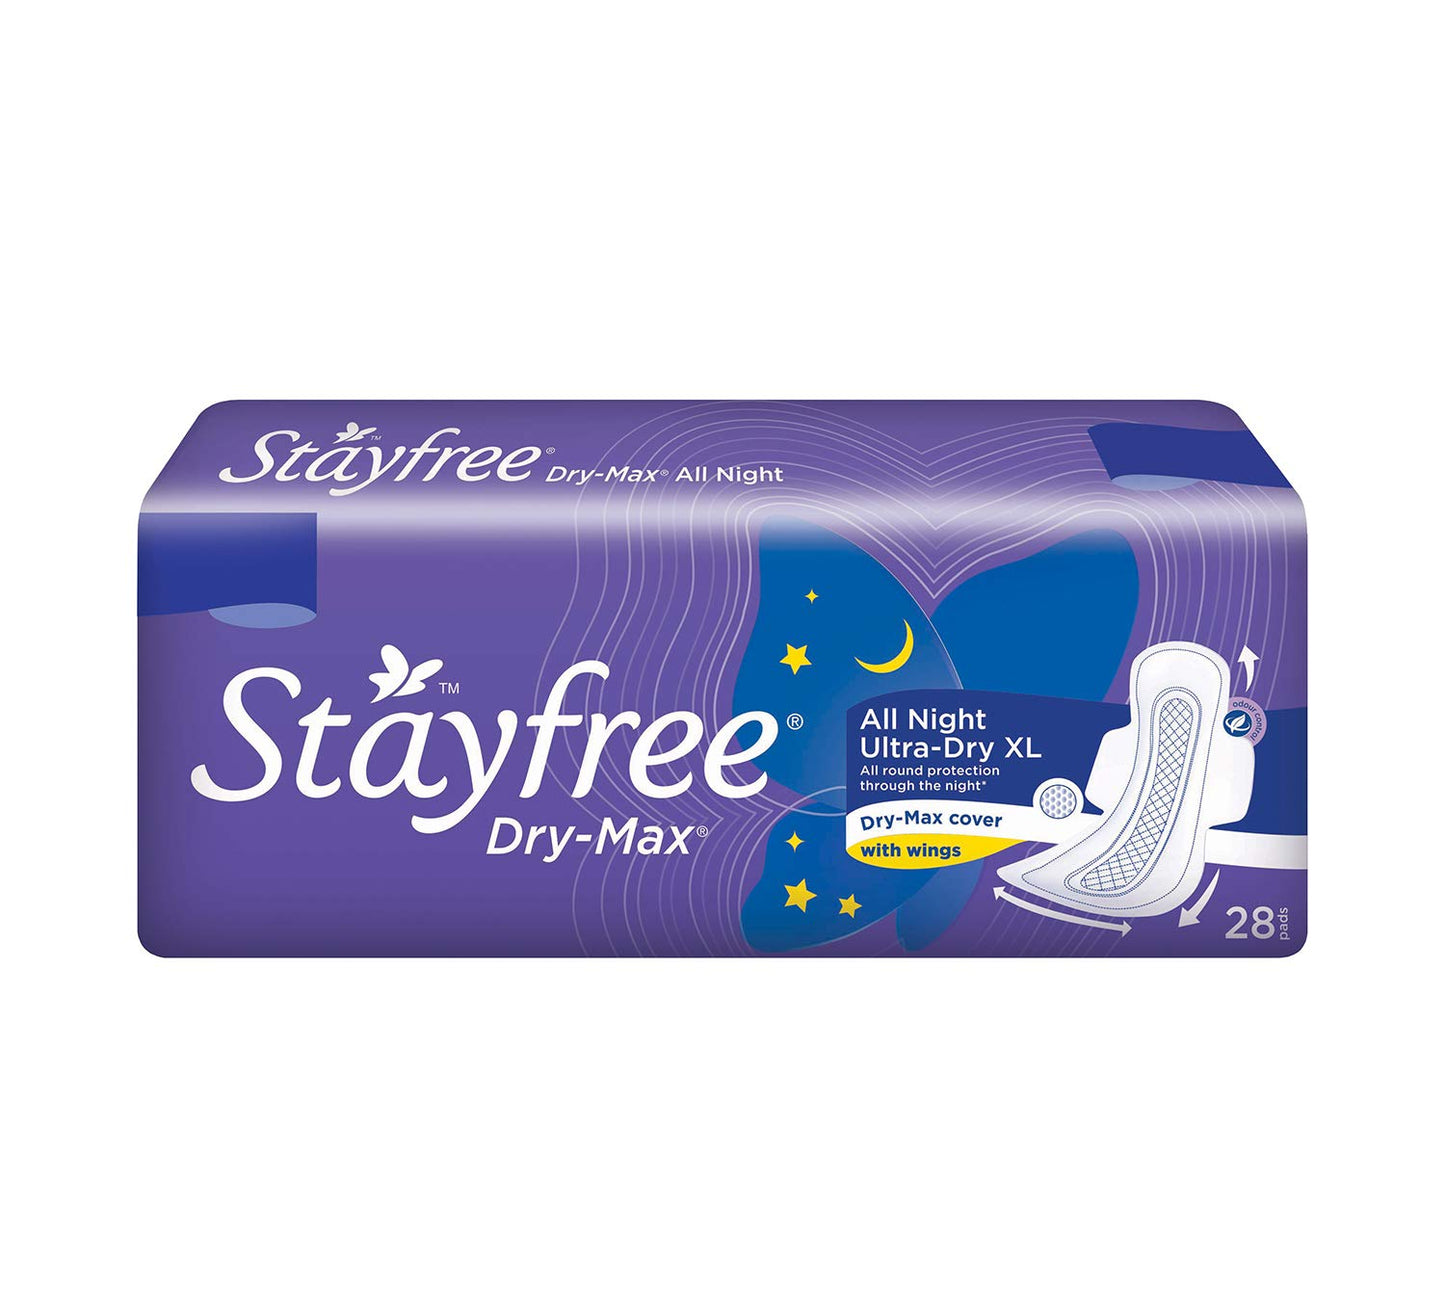 Stayfree Dry Max All Night, size- XL (28 pads)